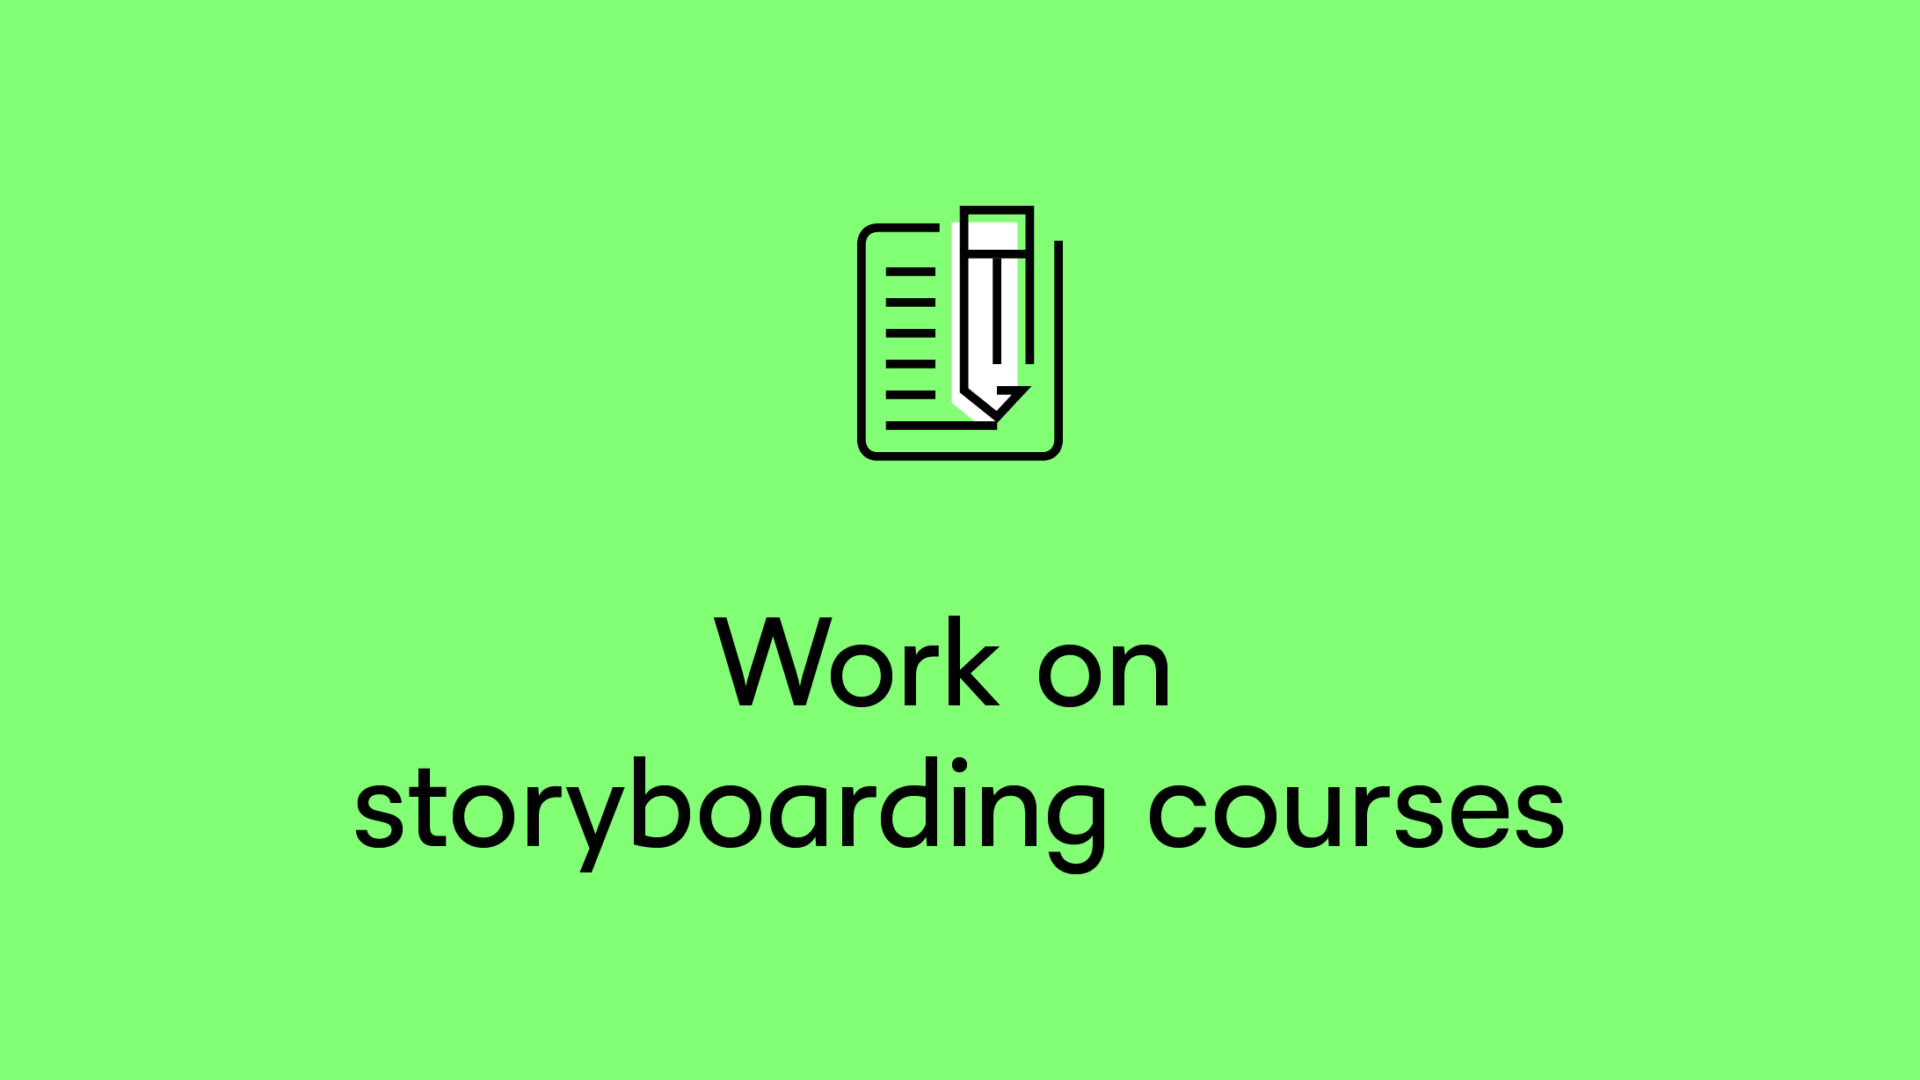 Work on storyboarding courses